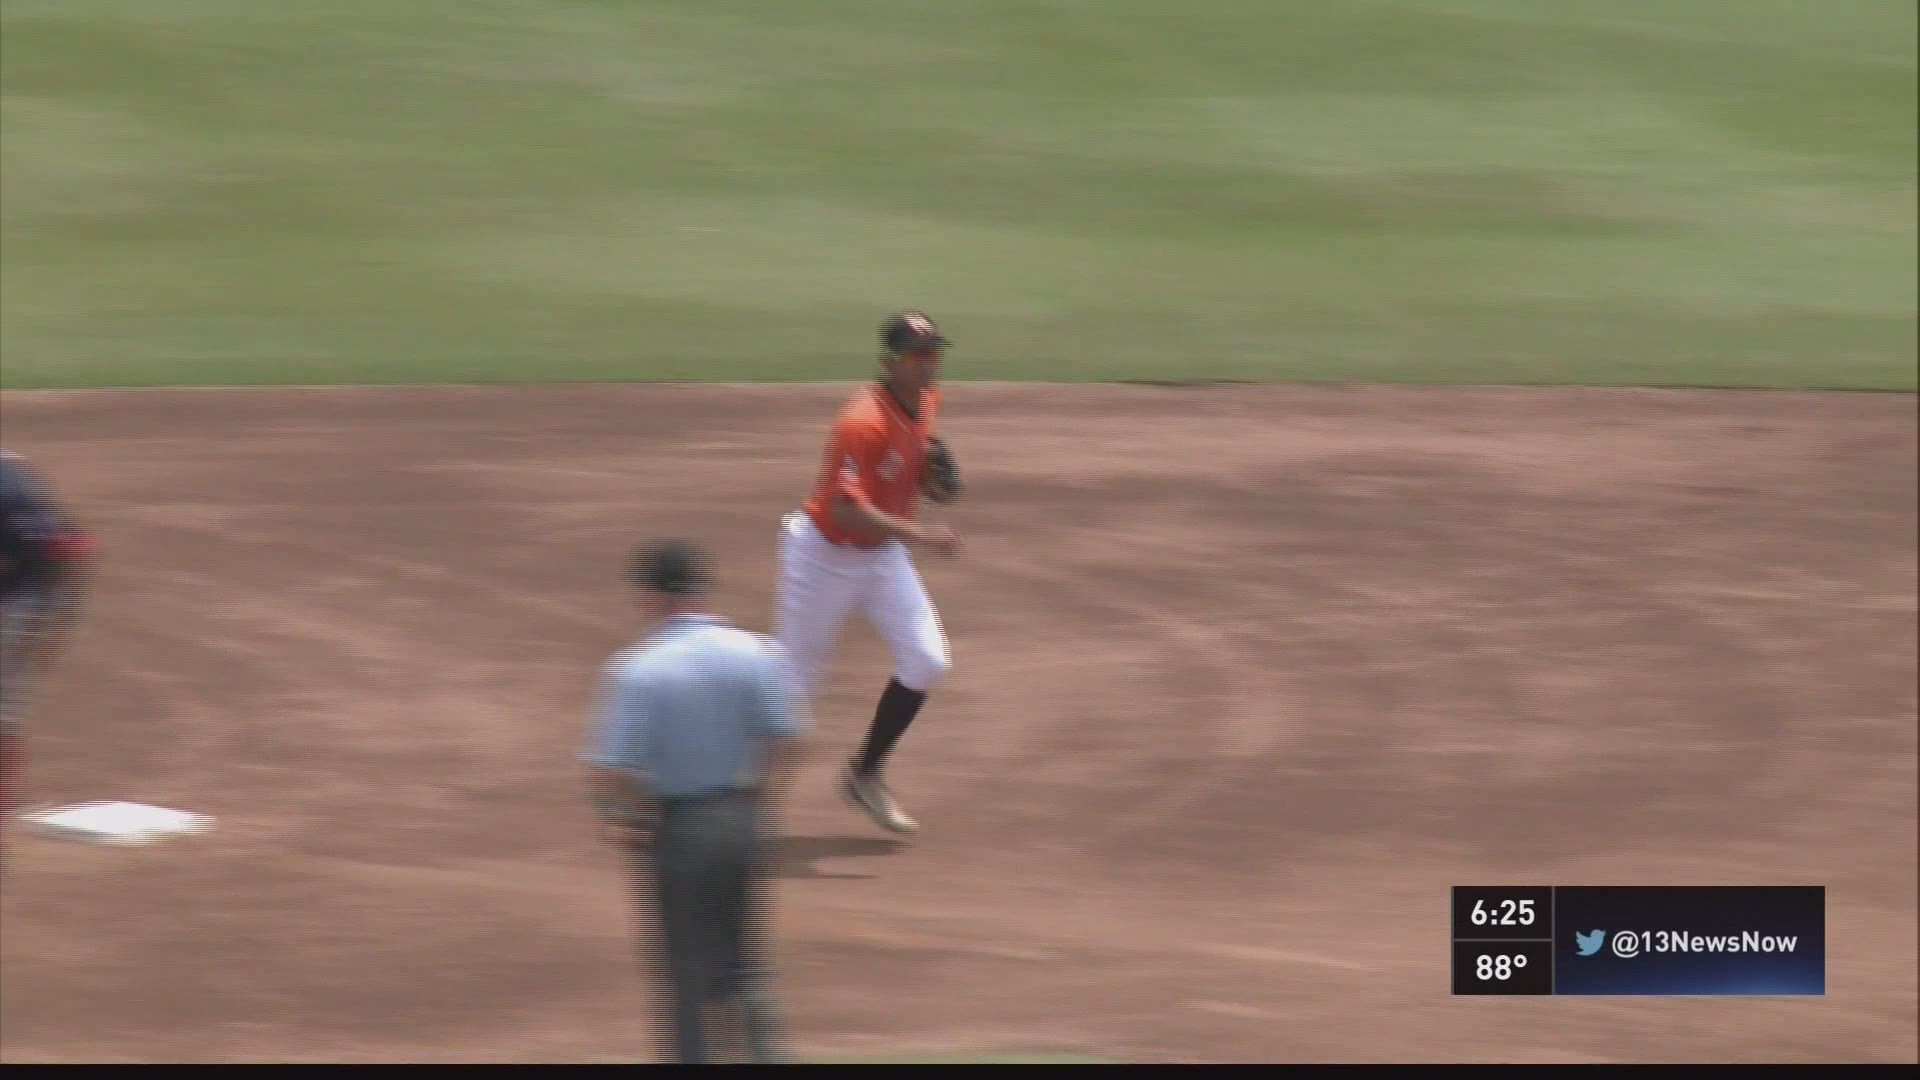 Mike Yastrzemski got a game winner bloop single in the bottom of the 9th as the Tides won over the Bats 4-3.